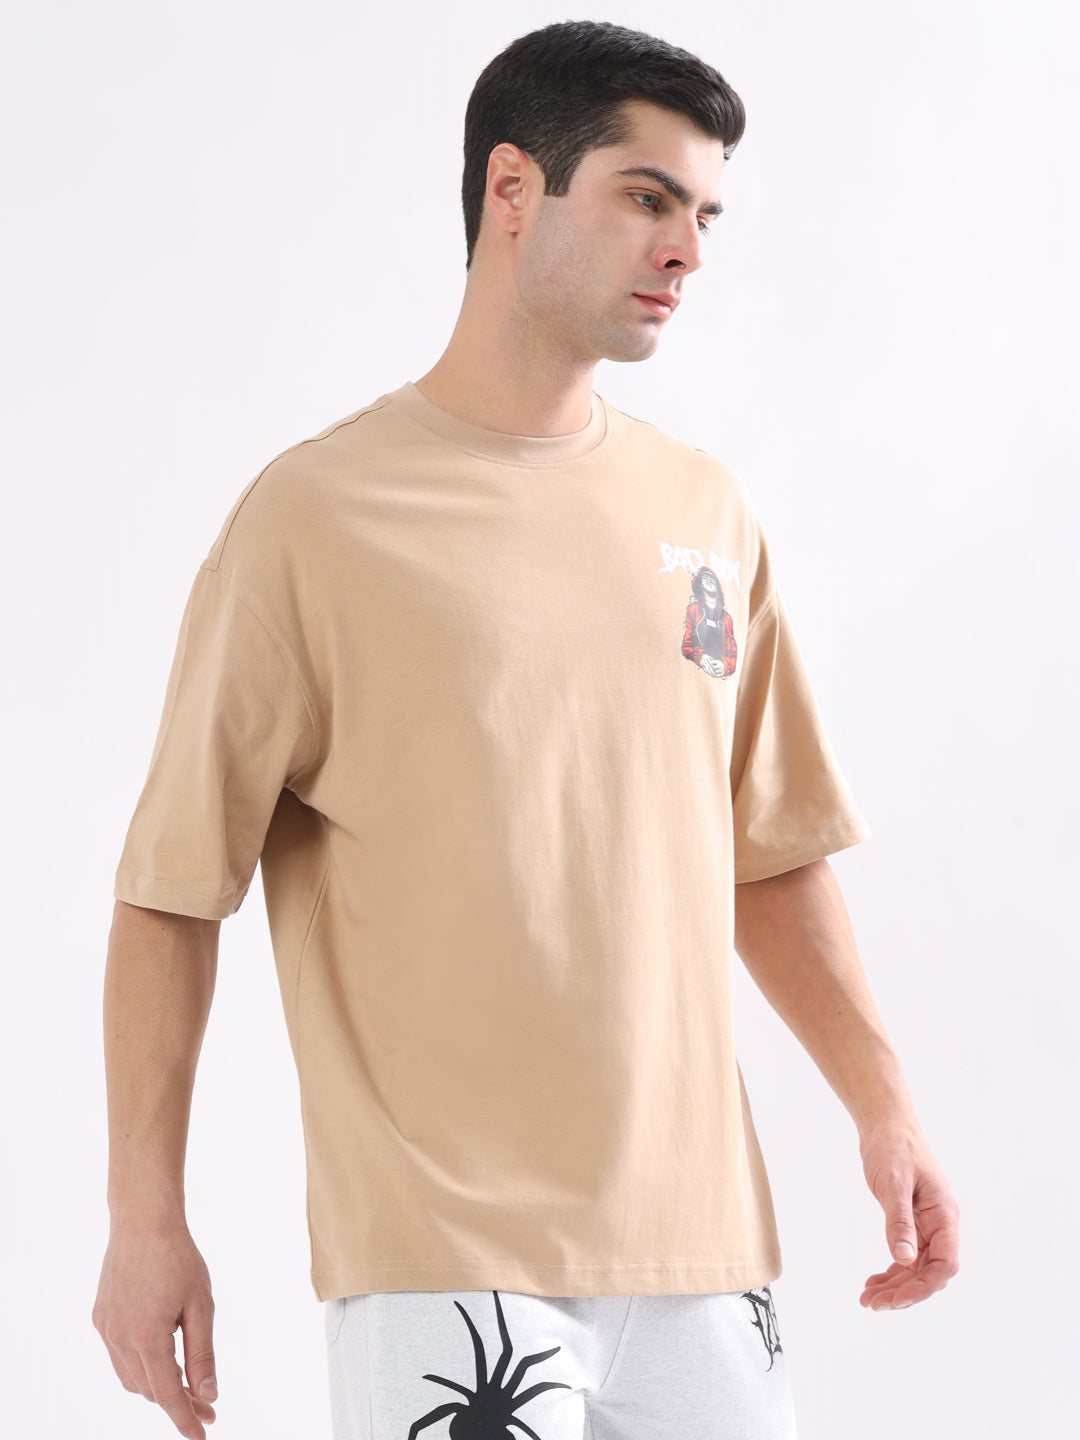 Bad Boy Over-Sized T-Shirt (Nude)